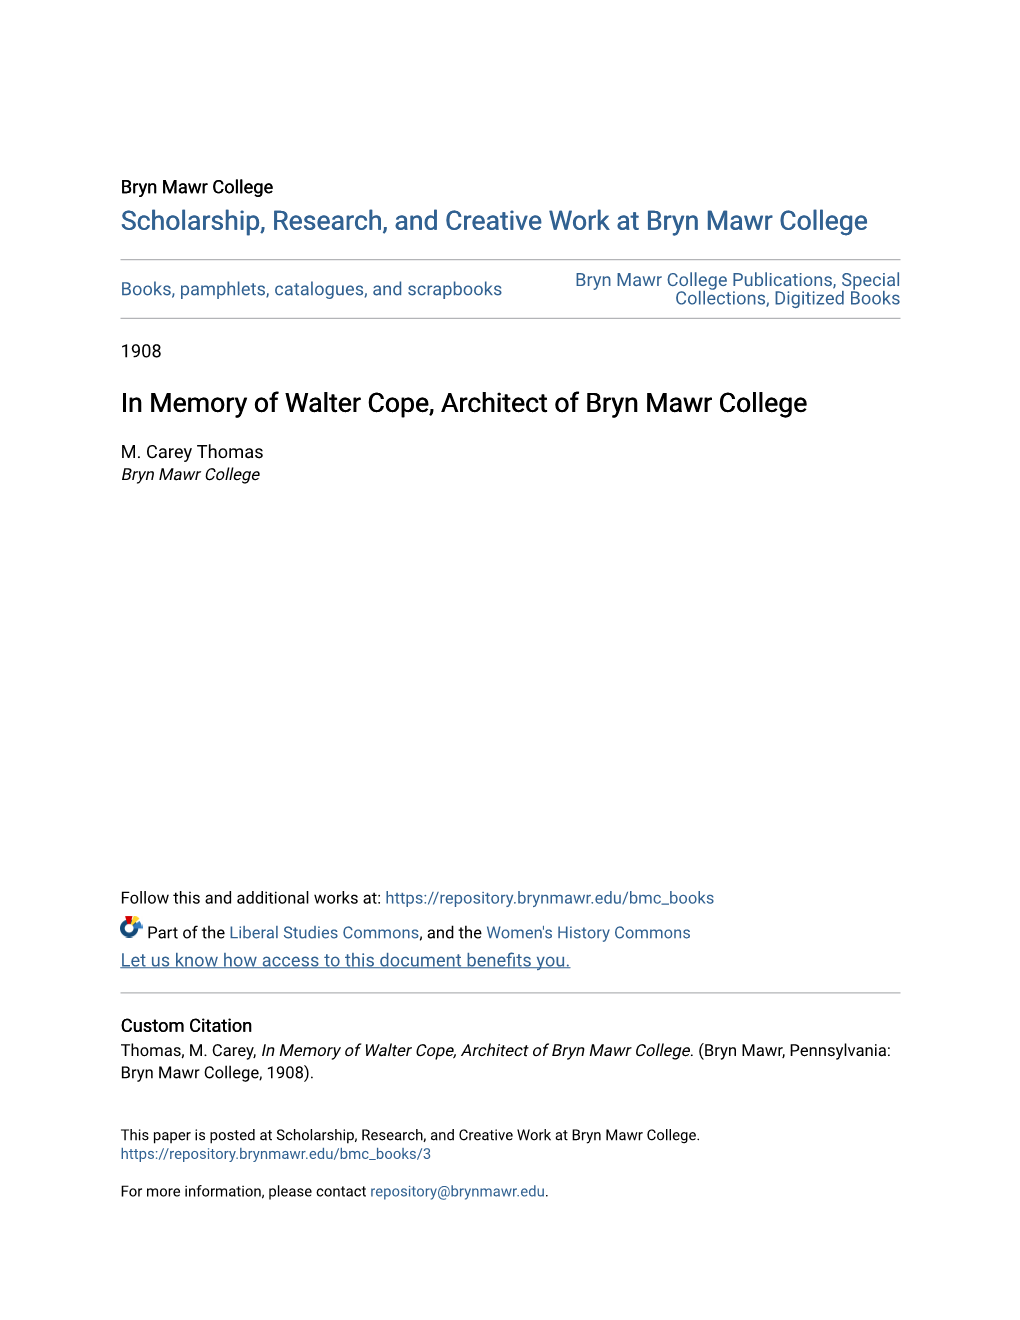 In Memory of Walter Cope, Architect of Bryn Mawr College